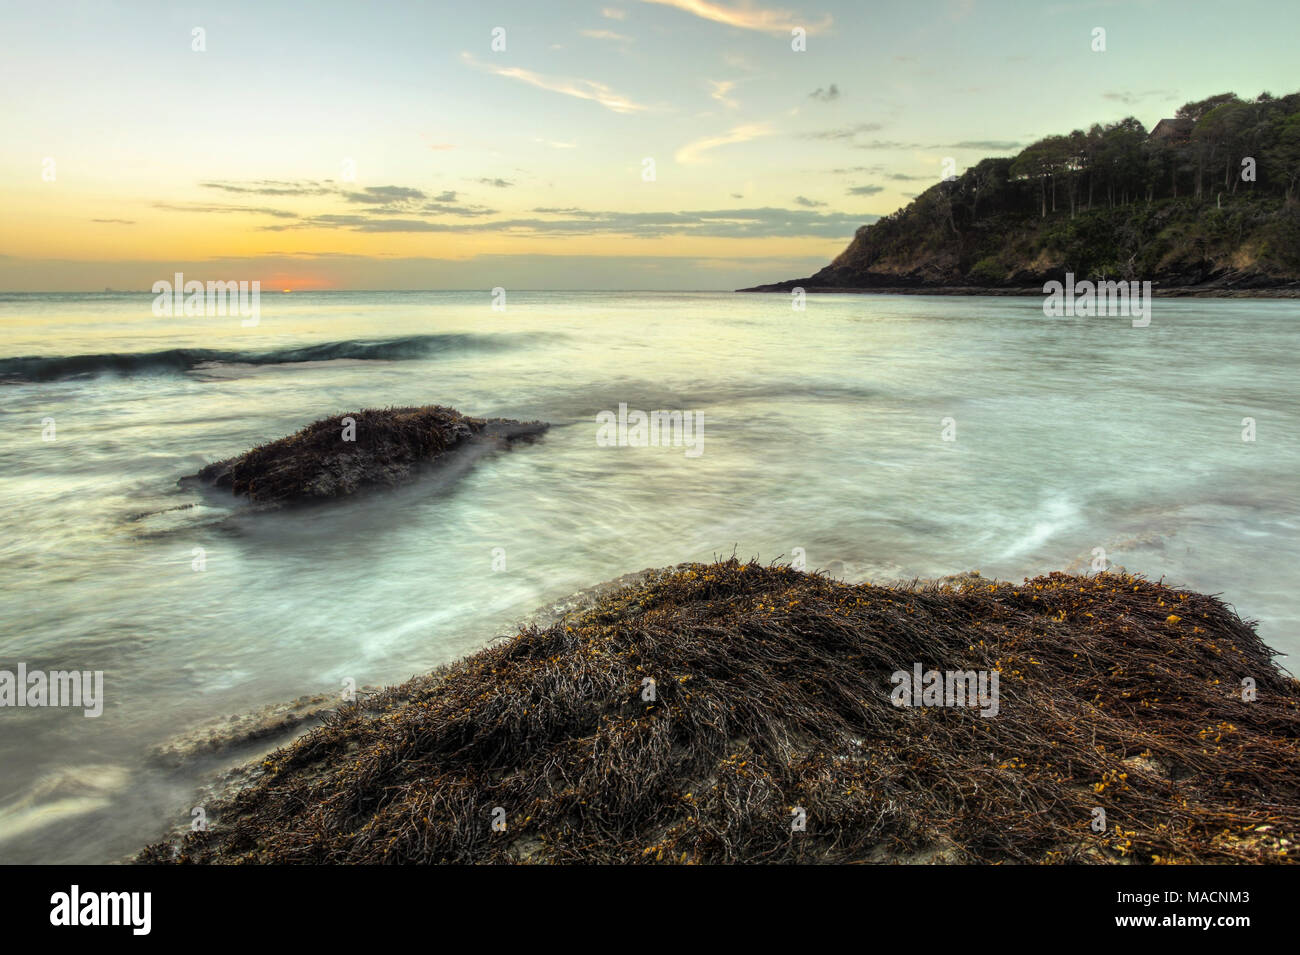 Ocean waves washing the rocks covered with algae and sea weed in sunset light. Koh Lanta, Thailand Stock Photo